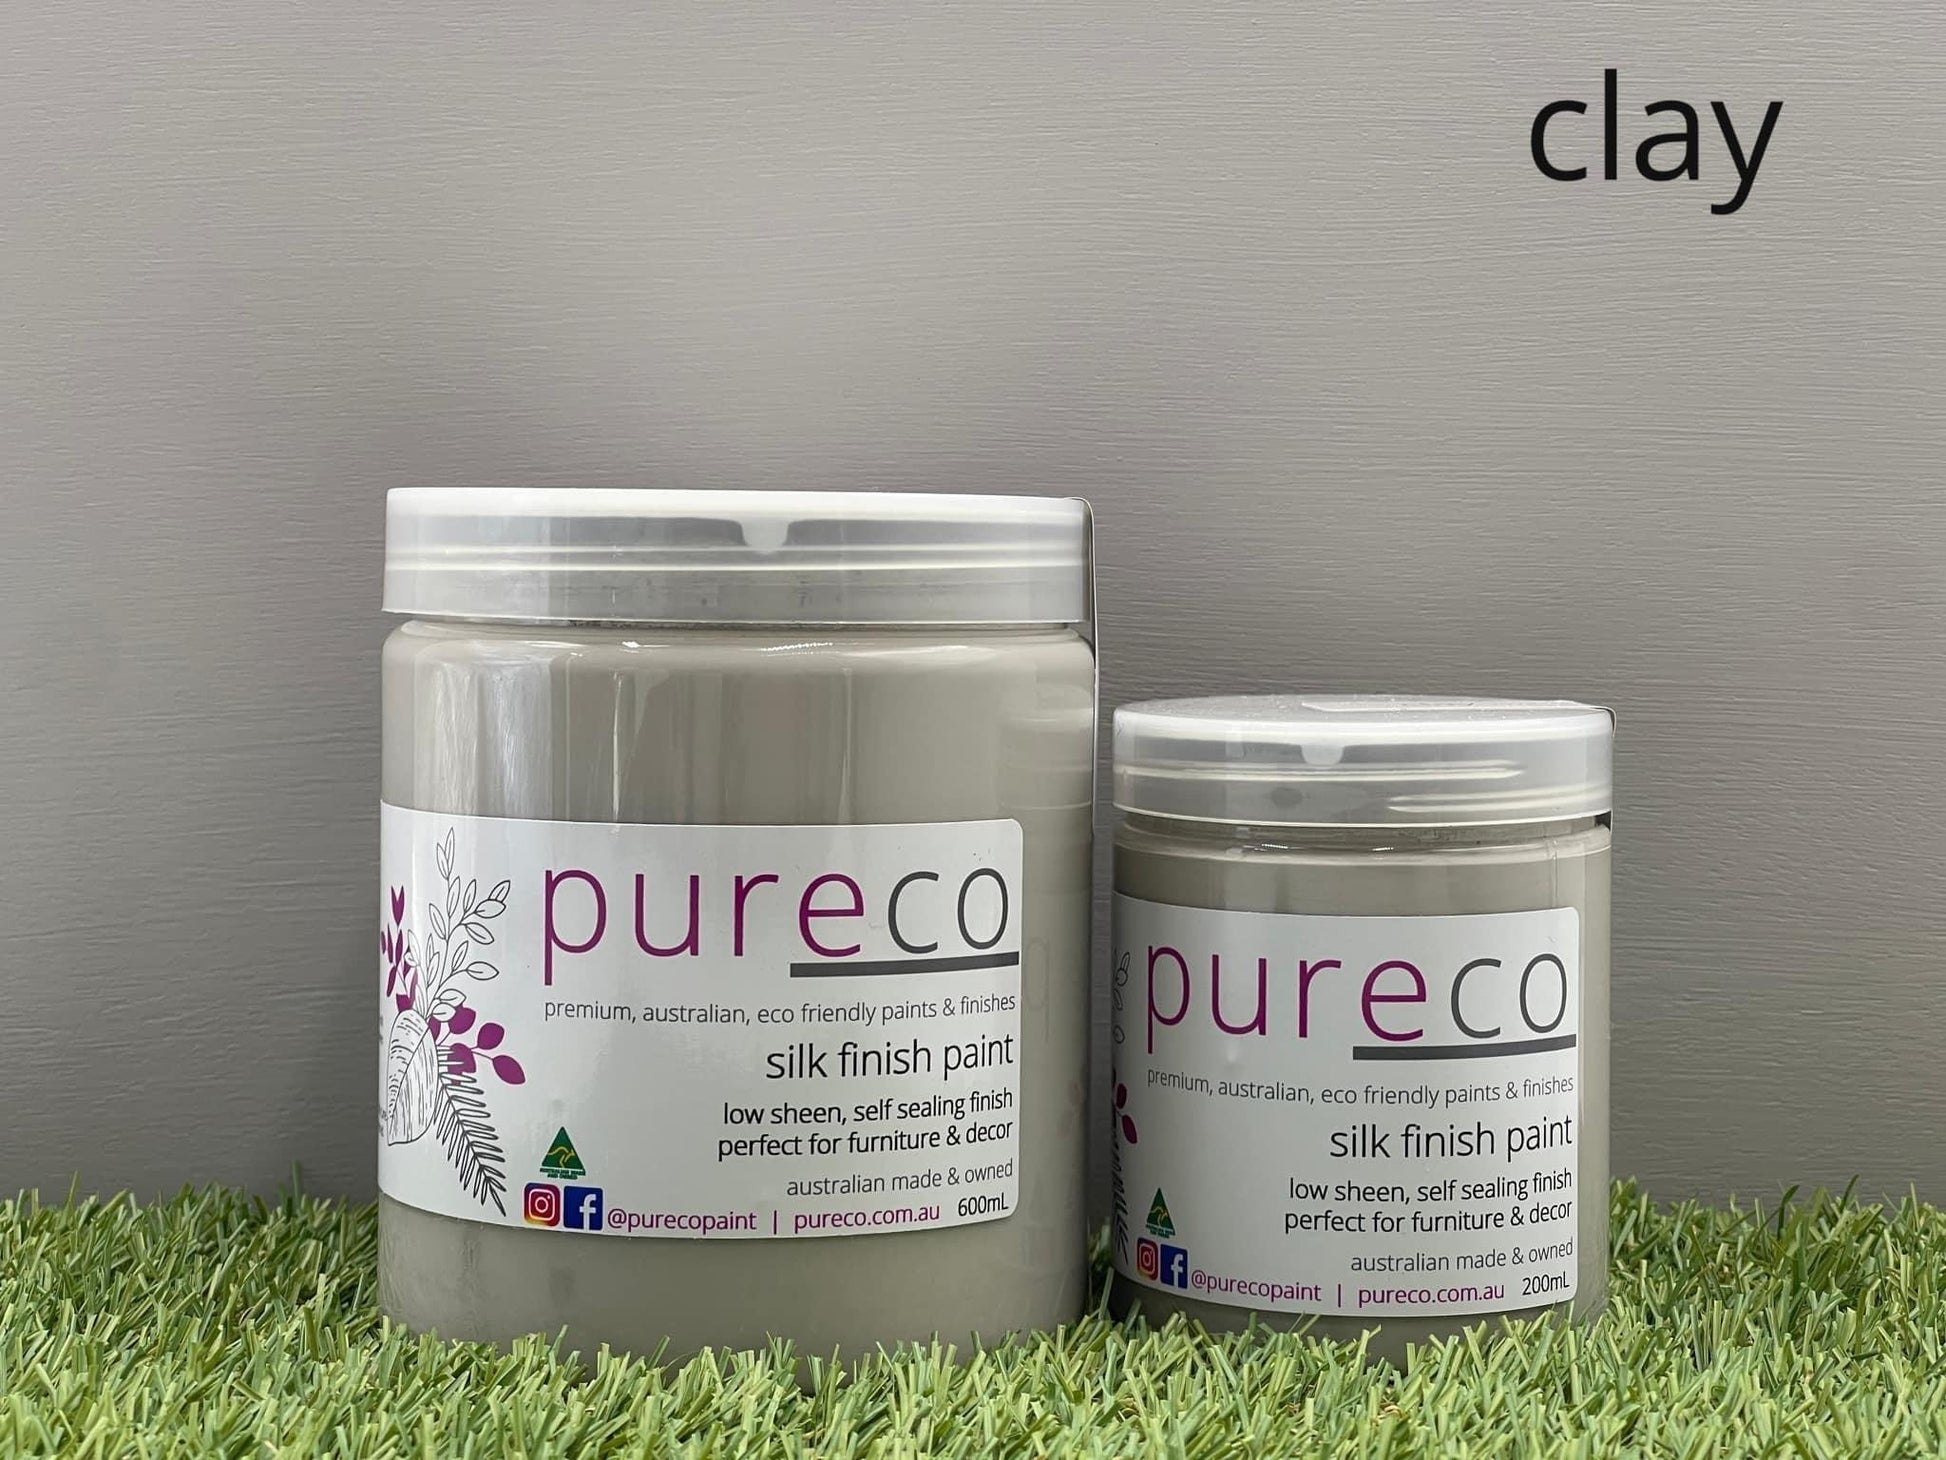 Pureco Paints Silk Finish Clay